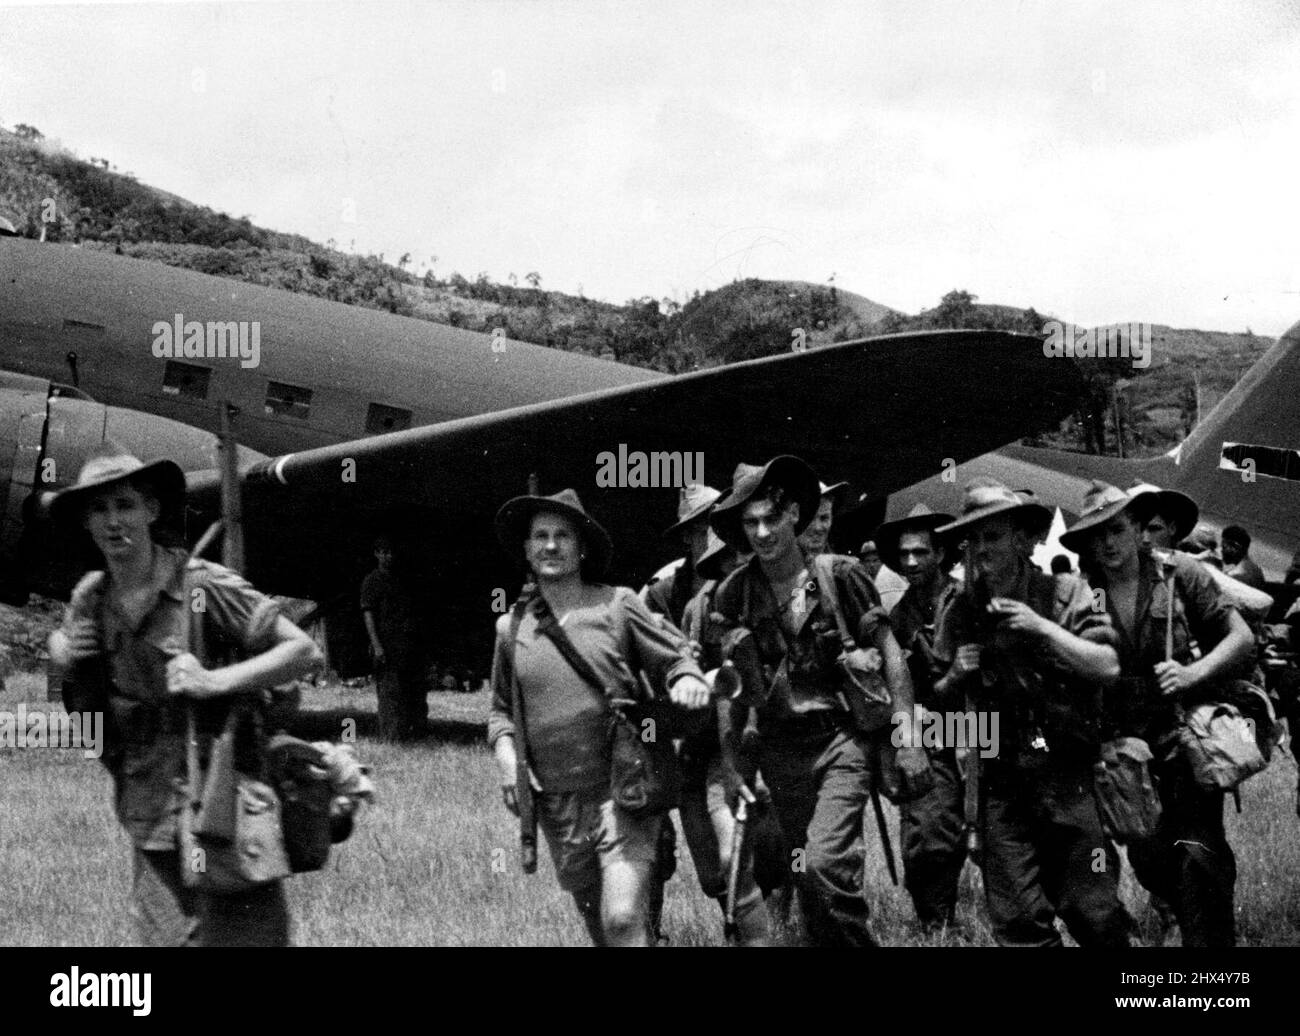 Japanese Unsuccessfully Attack Wau. Allied planes fly in troops in troops for the advance on Wau. Picture shows Australians leaving the planes on the aerodrome. These men went straight into action. February 25, 1943. Stock Photo